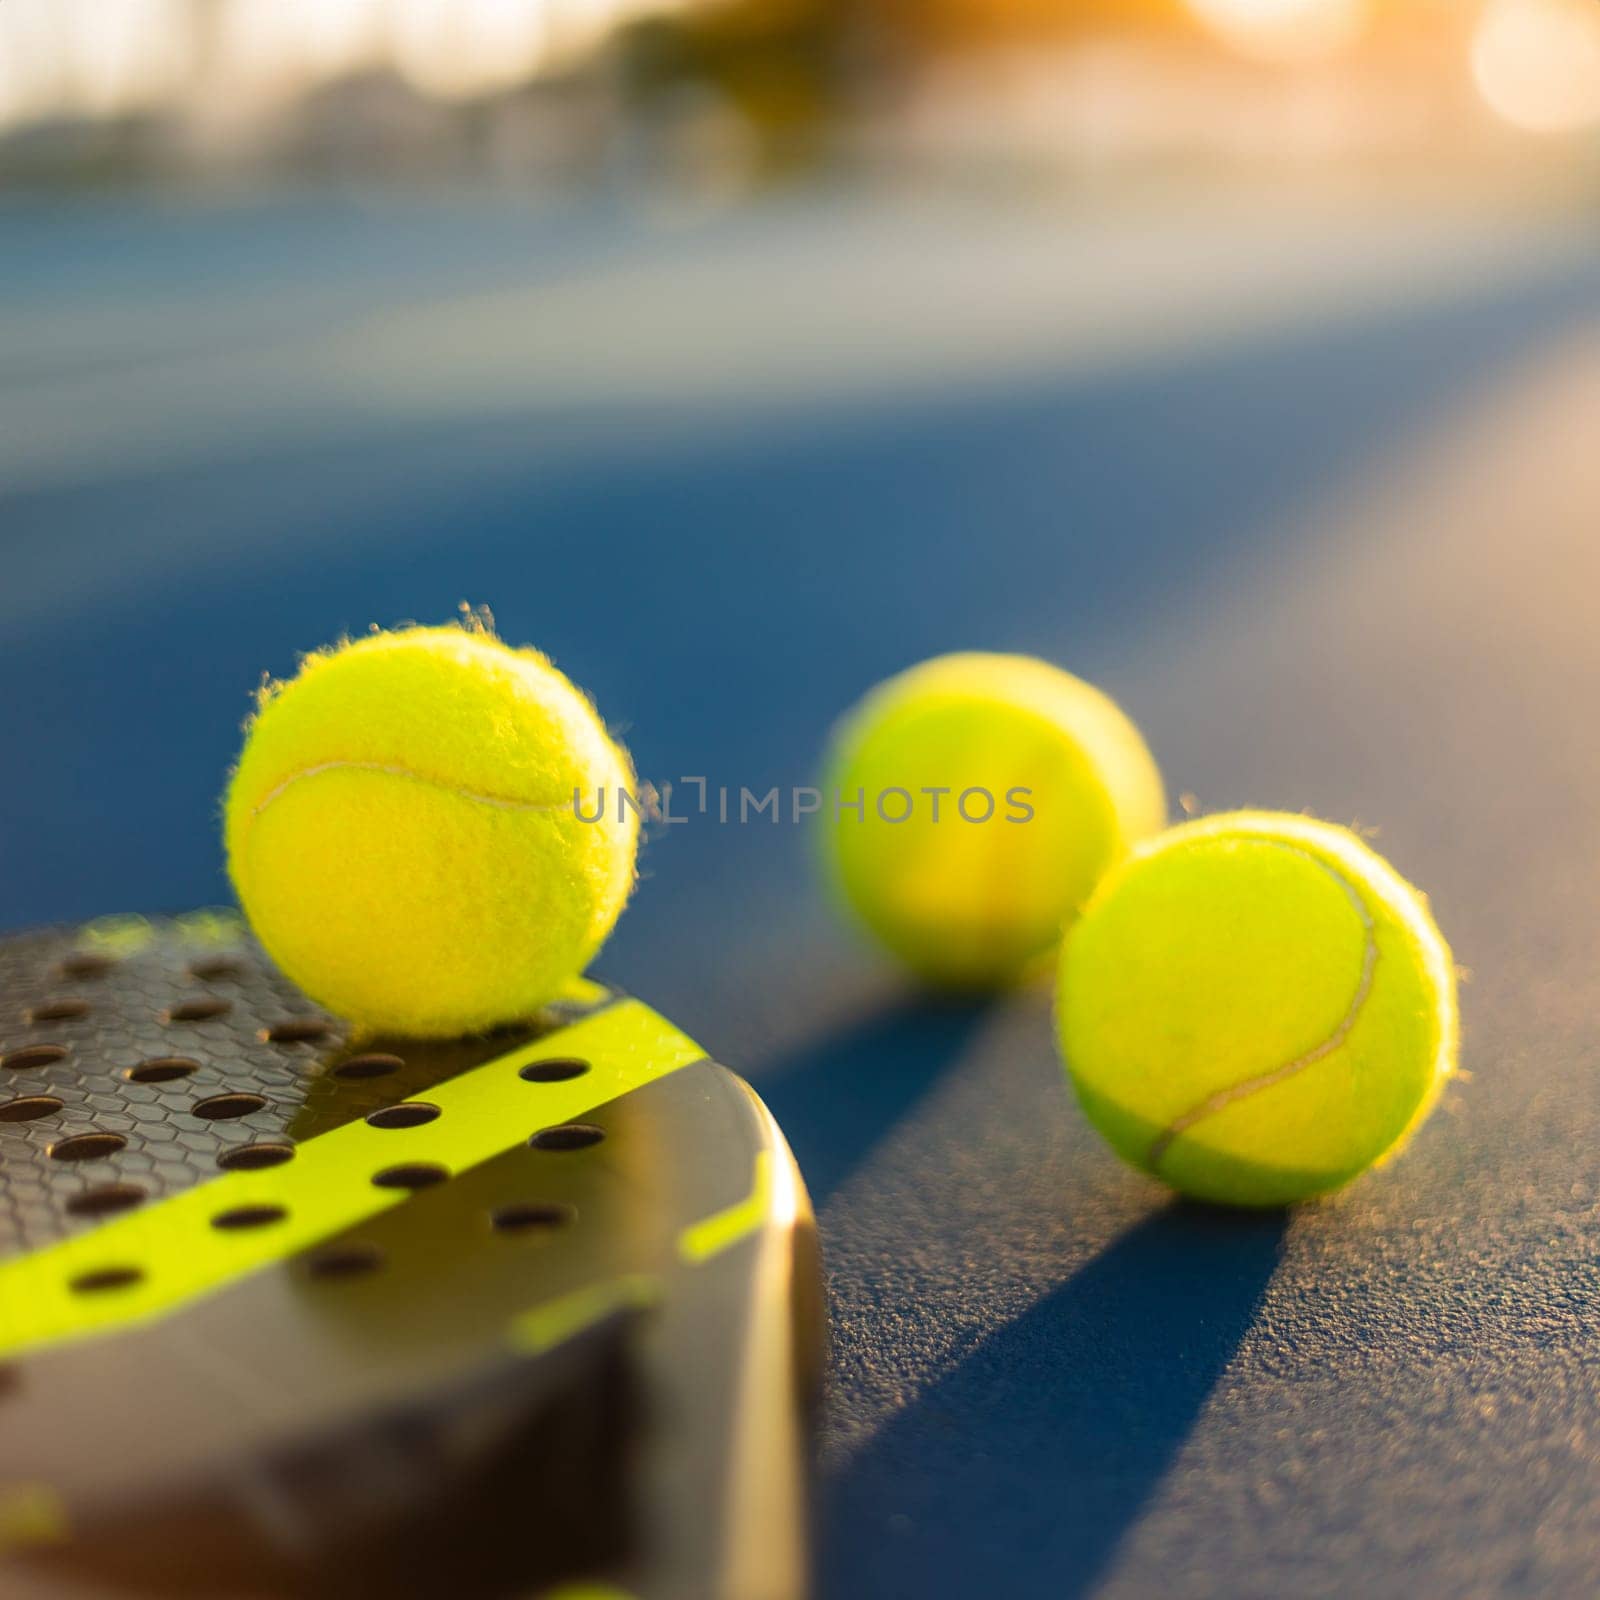 Padel tennis rackets. Sport court and balls. Download a high quality photo with paddle for the design of a sports app or social media advertisement